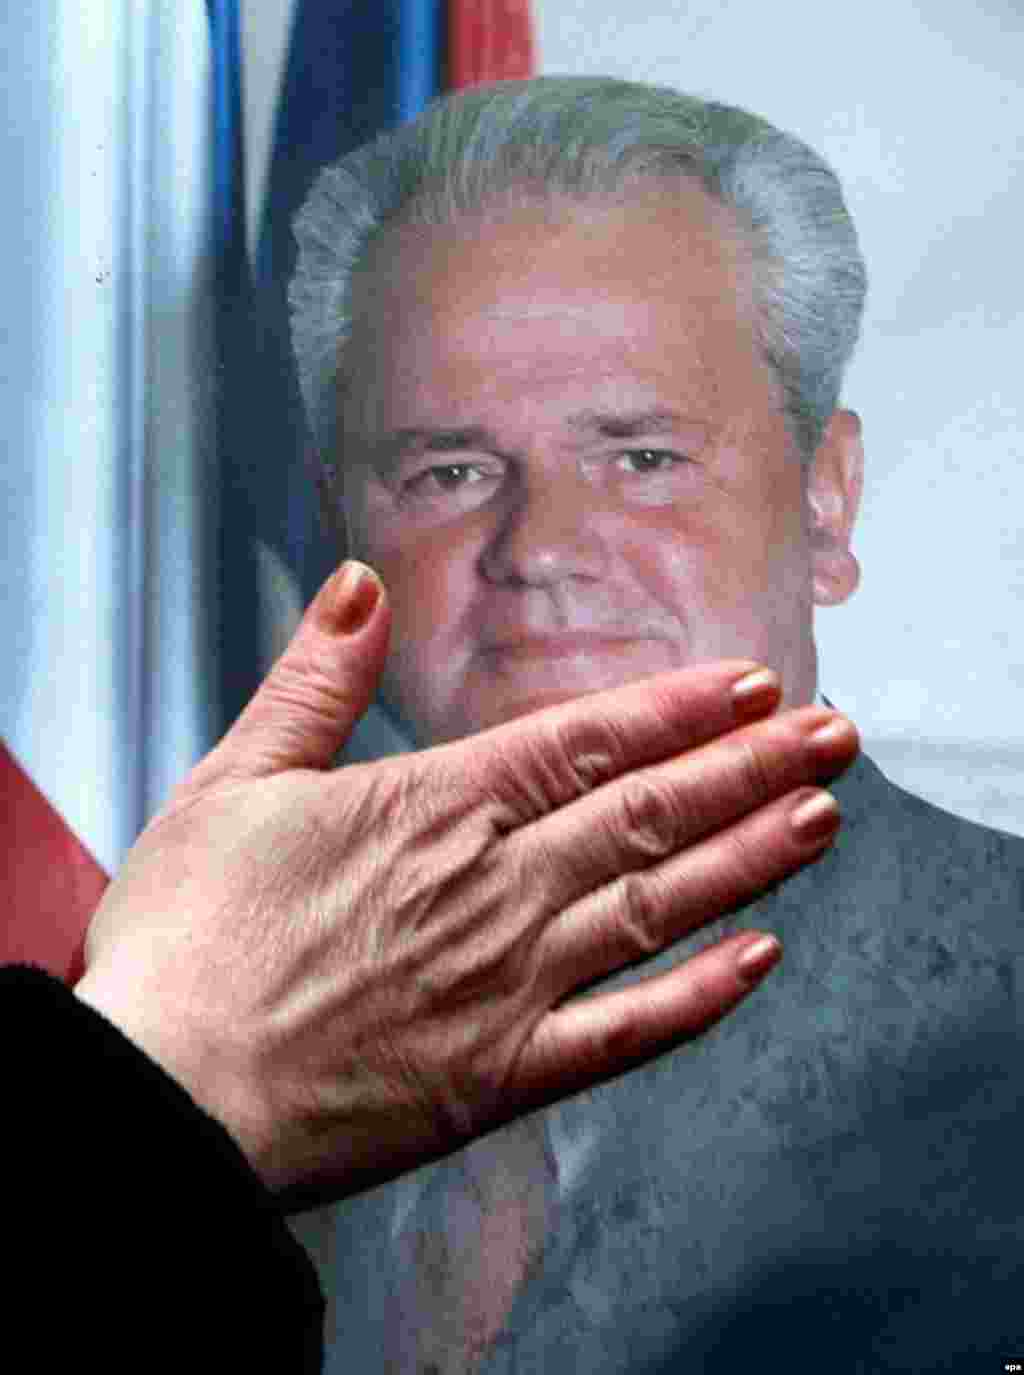 A supporter of former Serbian leader Slobodan Milosevic touches his portrait in front of the Belgrade offices of his party, the Socialist Party of Serbia (epa) - In the end, justice was not done. Slobodan Milosevic, the man who accelerated the collapse of Yugoslavia by trying to preserve Serbian power, died in detention before he was judged the mastermind of many of the atrocities committed in the Balkans in the 1990s. Serbia denied him a state funeral and his family remains on the run, but Belgrade hasn't convinced the EU it is serious about catching other war criminals.